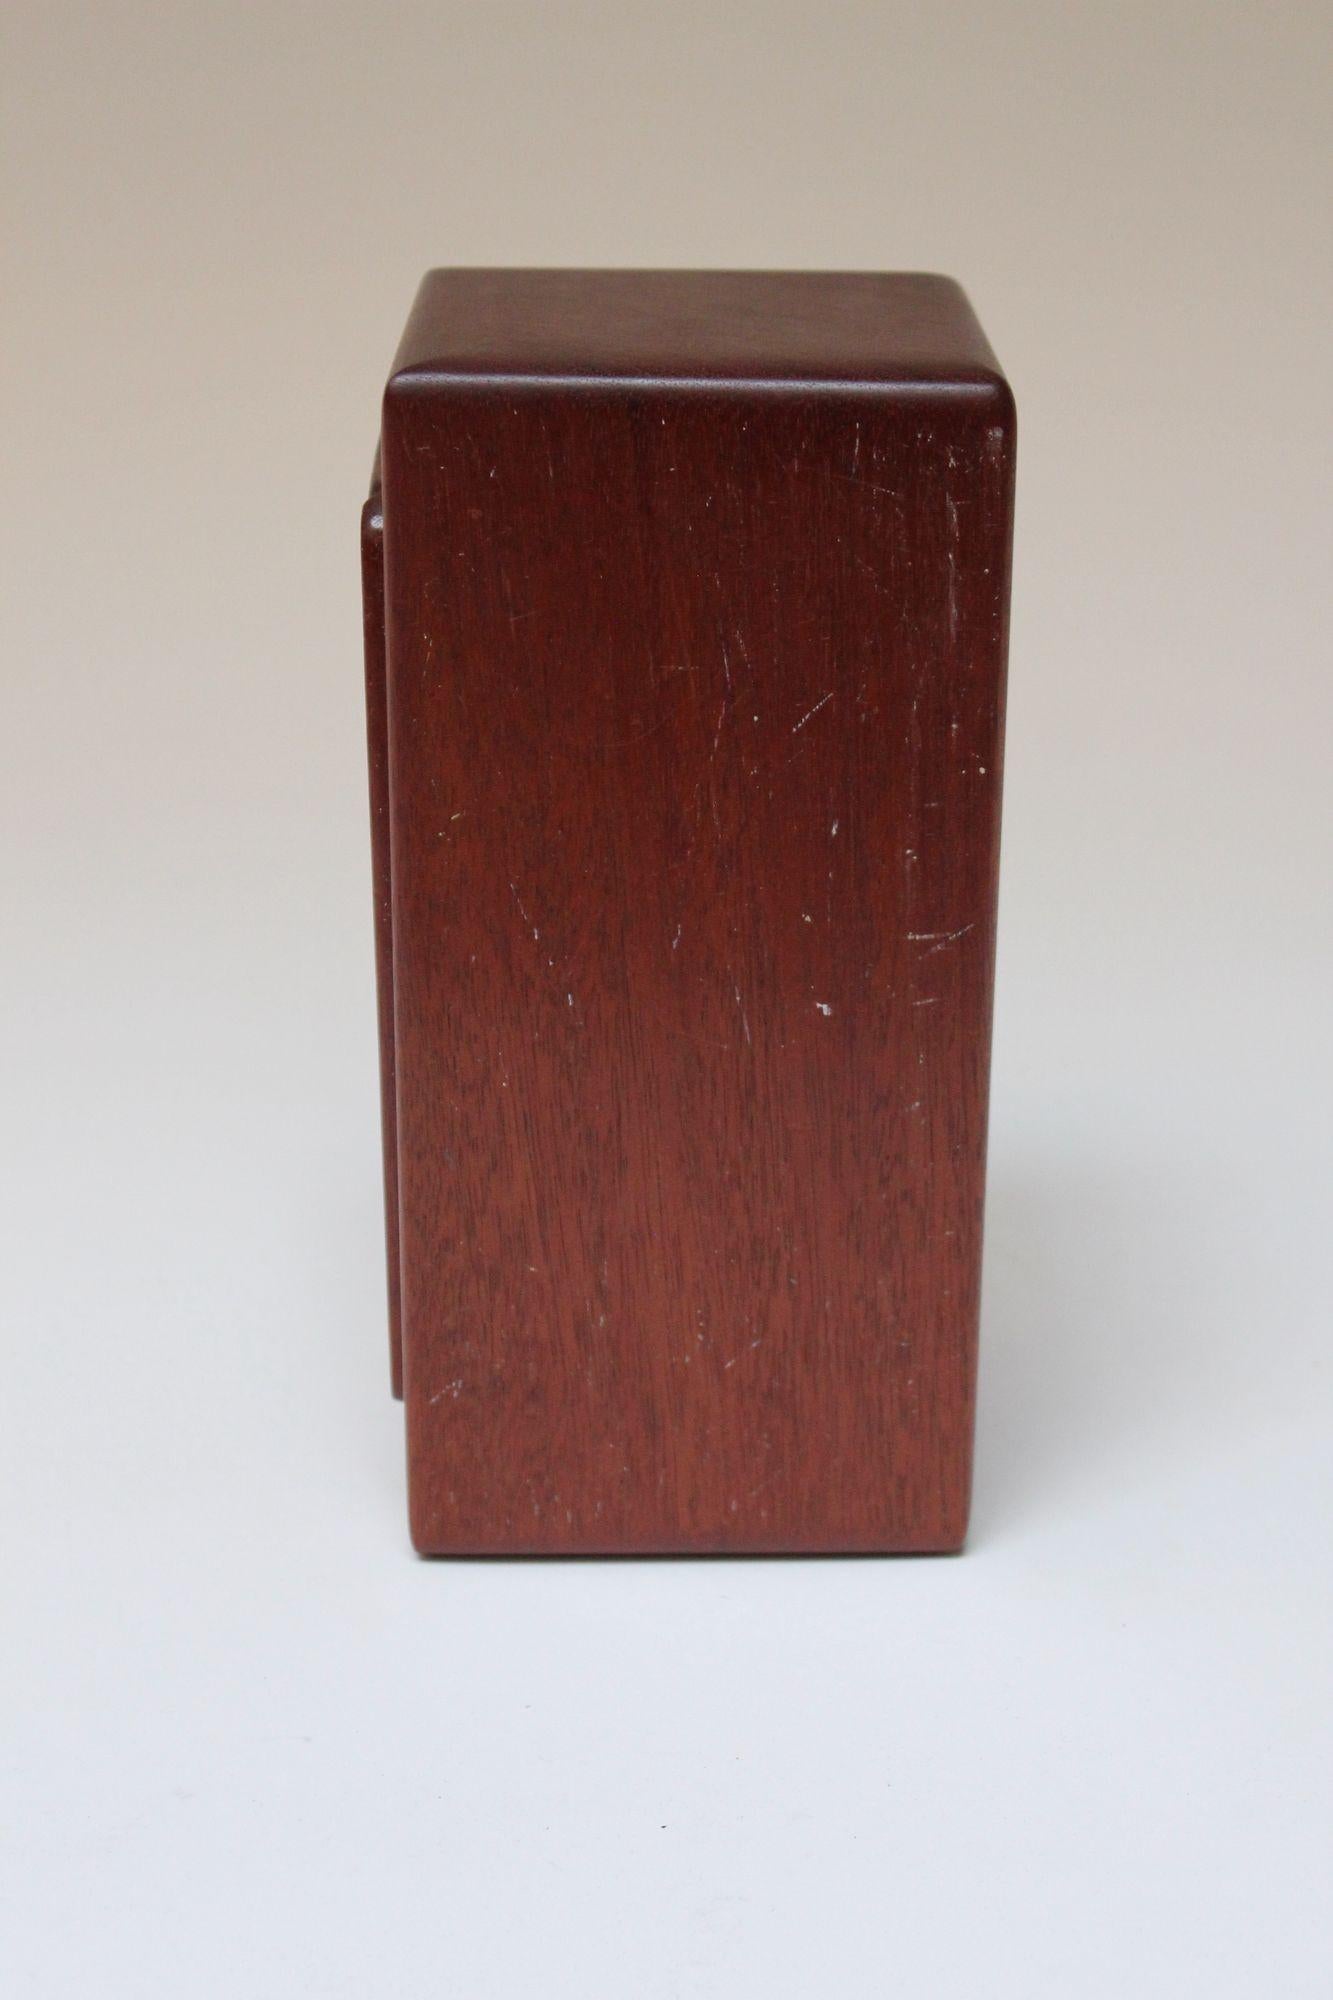 Hand-Carved puzzle box composed of miniature seats and tables all ingeniously stacked and nestled into the rectangular holder that doubles as a table itself.
Includes a variety of chair and table sizes, as shown.
There are some scuffs and spots to